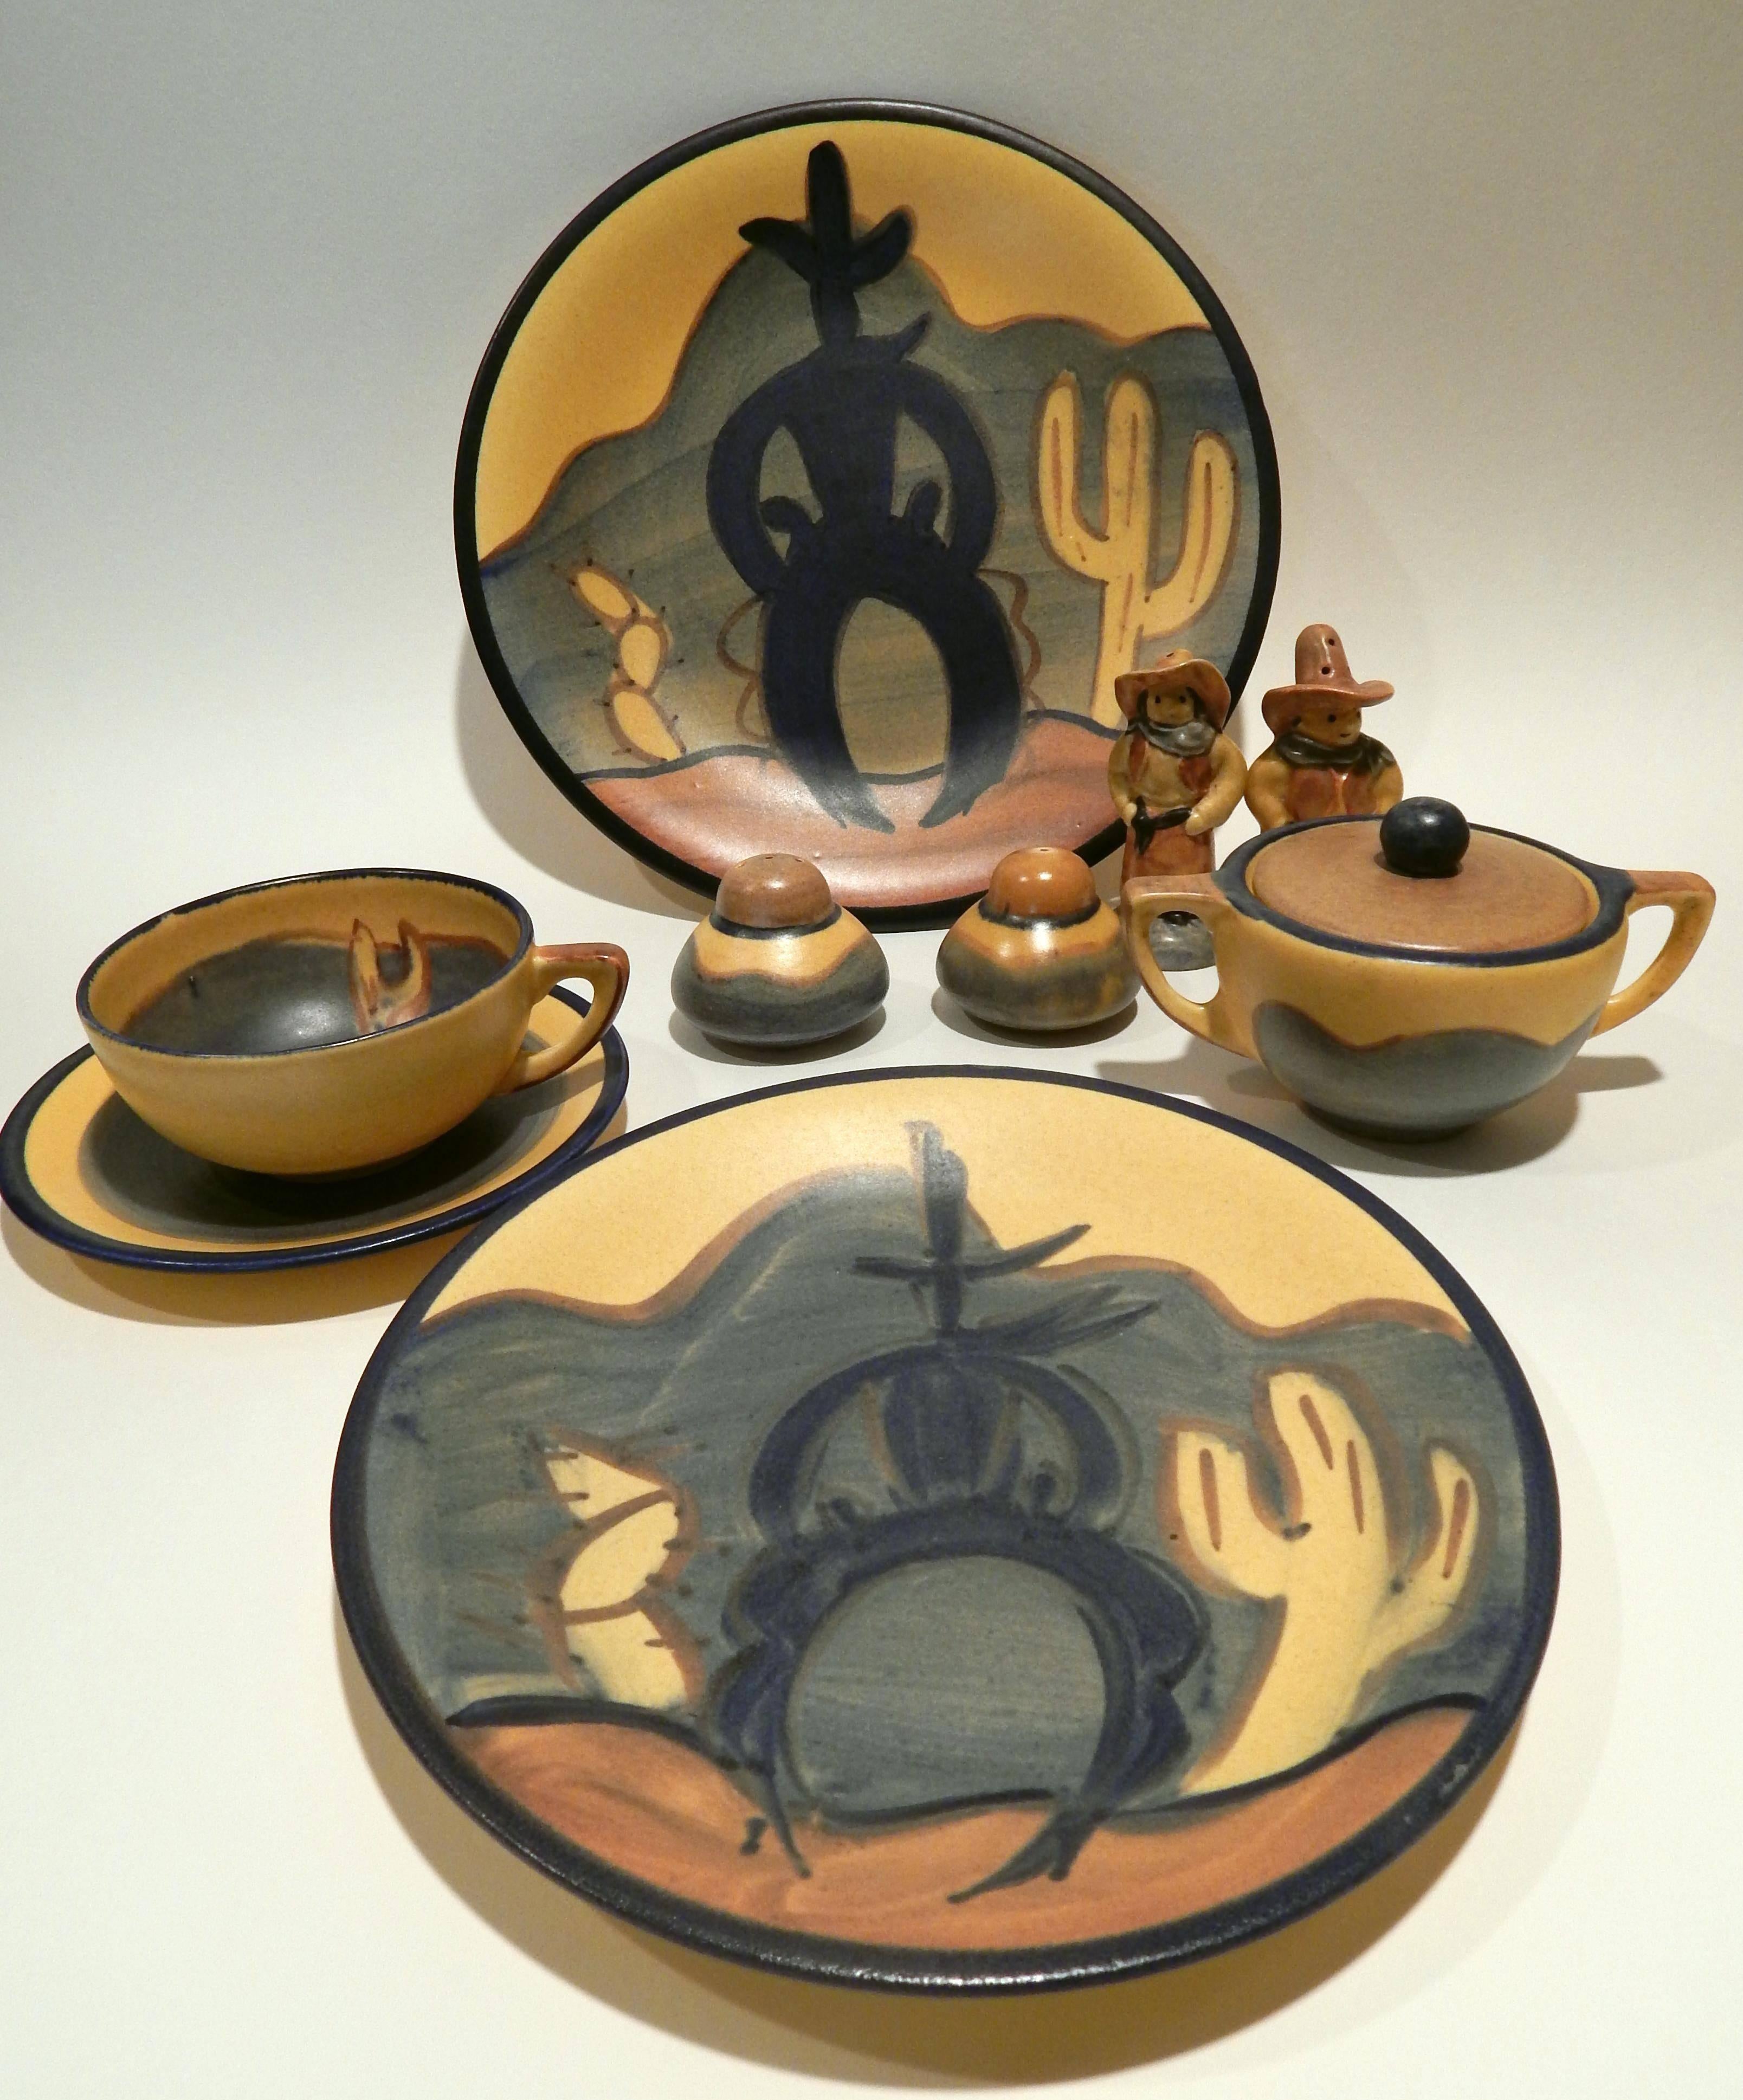 This beautiful and hard to find Stangl Ranger pattern is very collectible.
This pattern is yellow and blue and features a Southwestern bow-legged
cowboy and saguaro motif.

The set includes:
Eight dinner plates 10